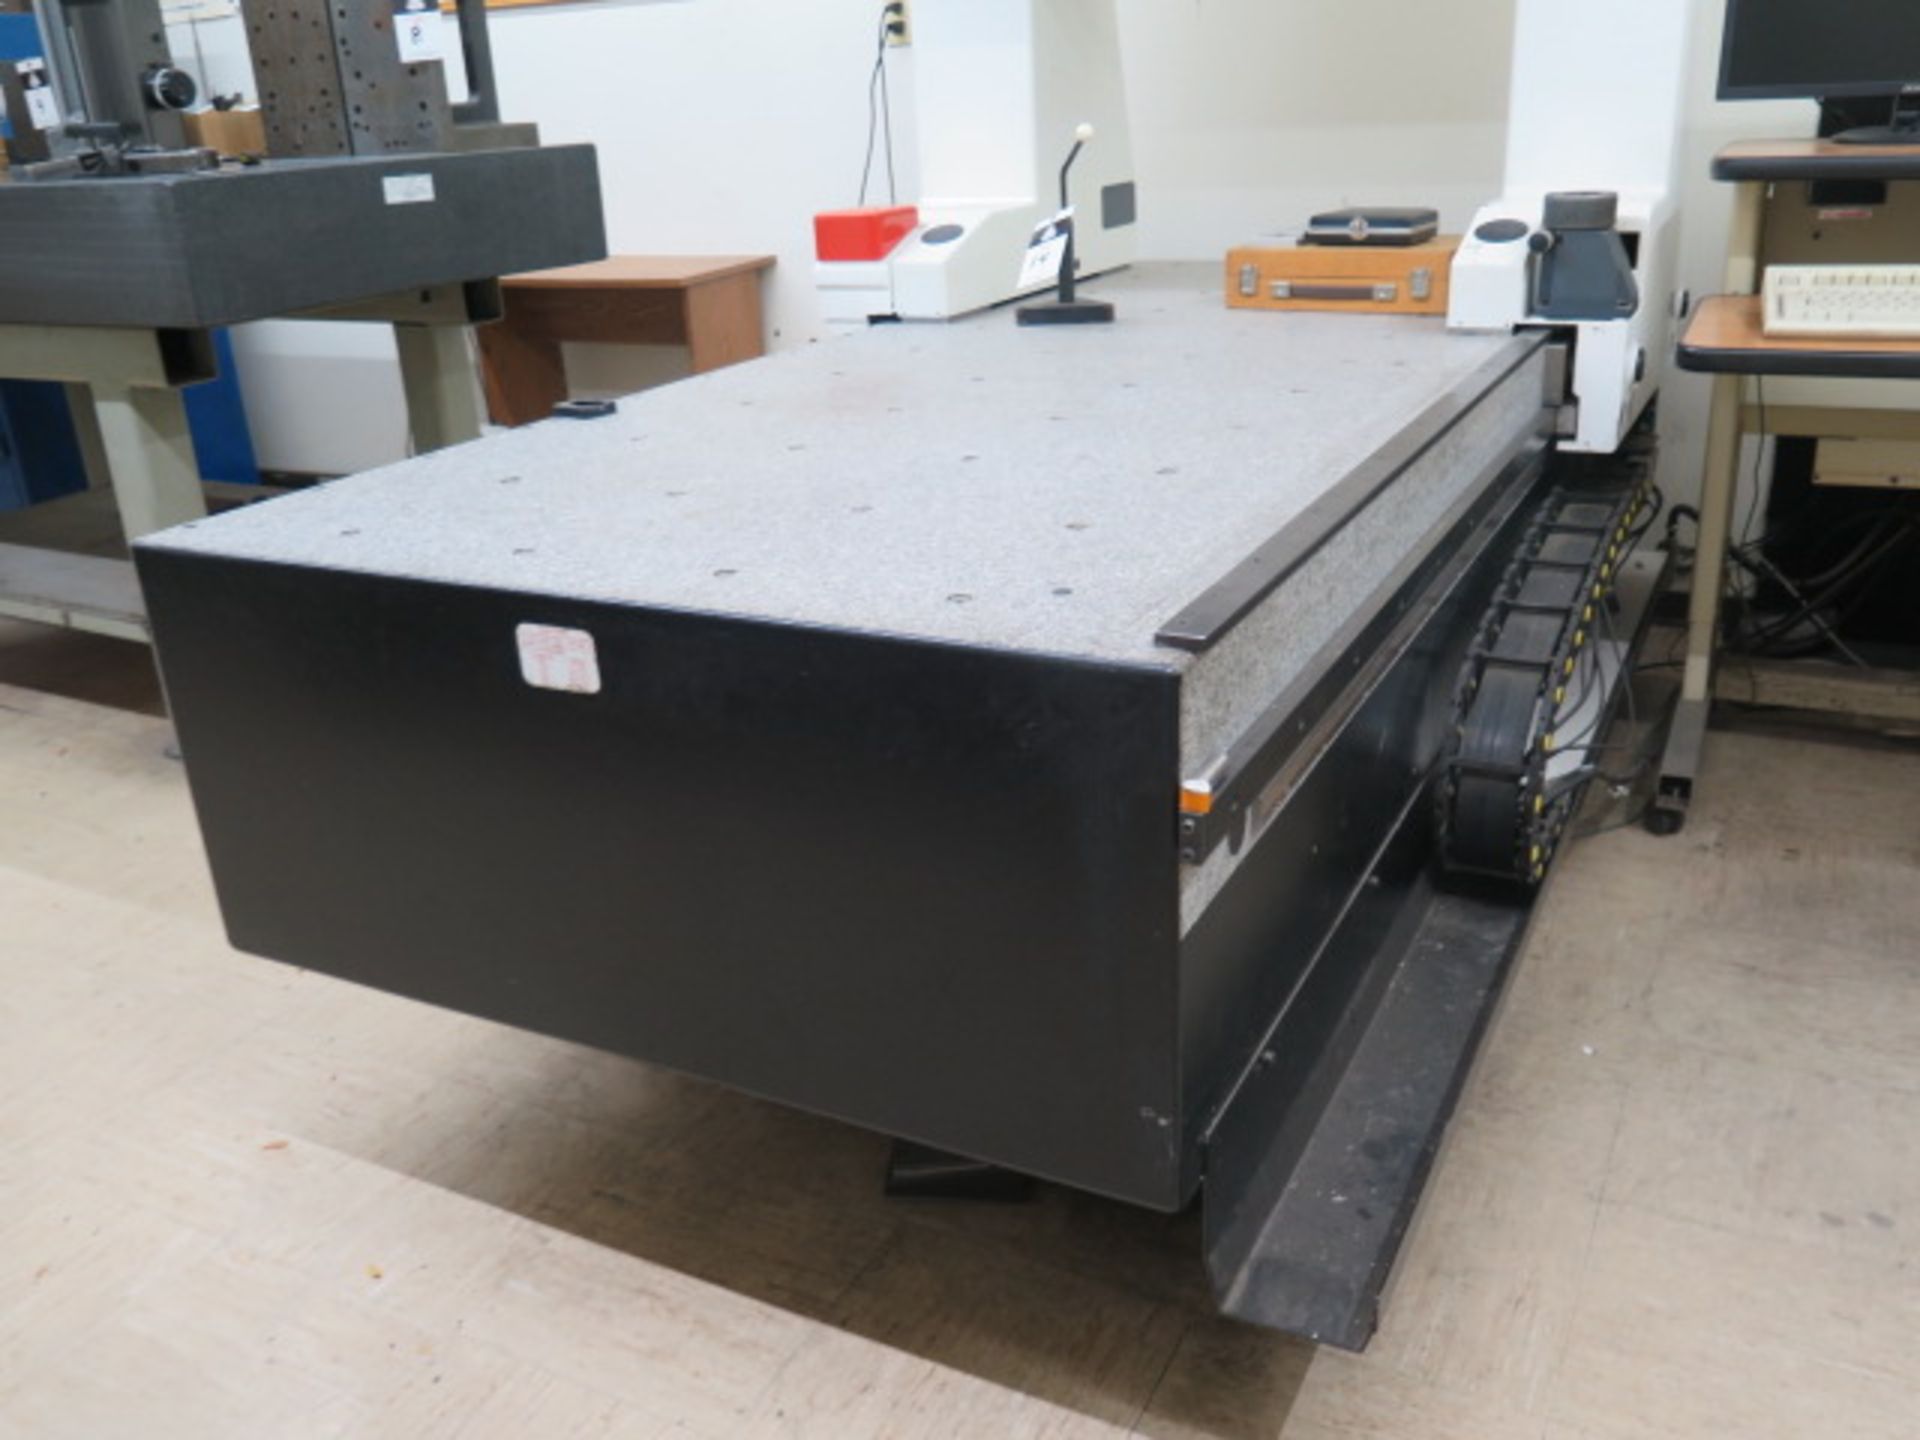 DEA mdl. 0103 CMM s/n 00537 w/ Renishaw TP 1S Probe Head, 50” x 26” x 18” Work Envelope, SOLD AS IS - Image 5 of 18